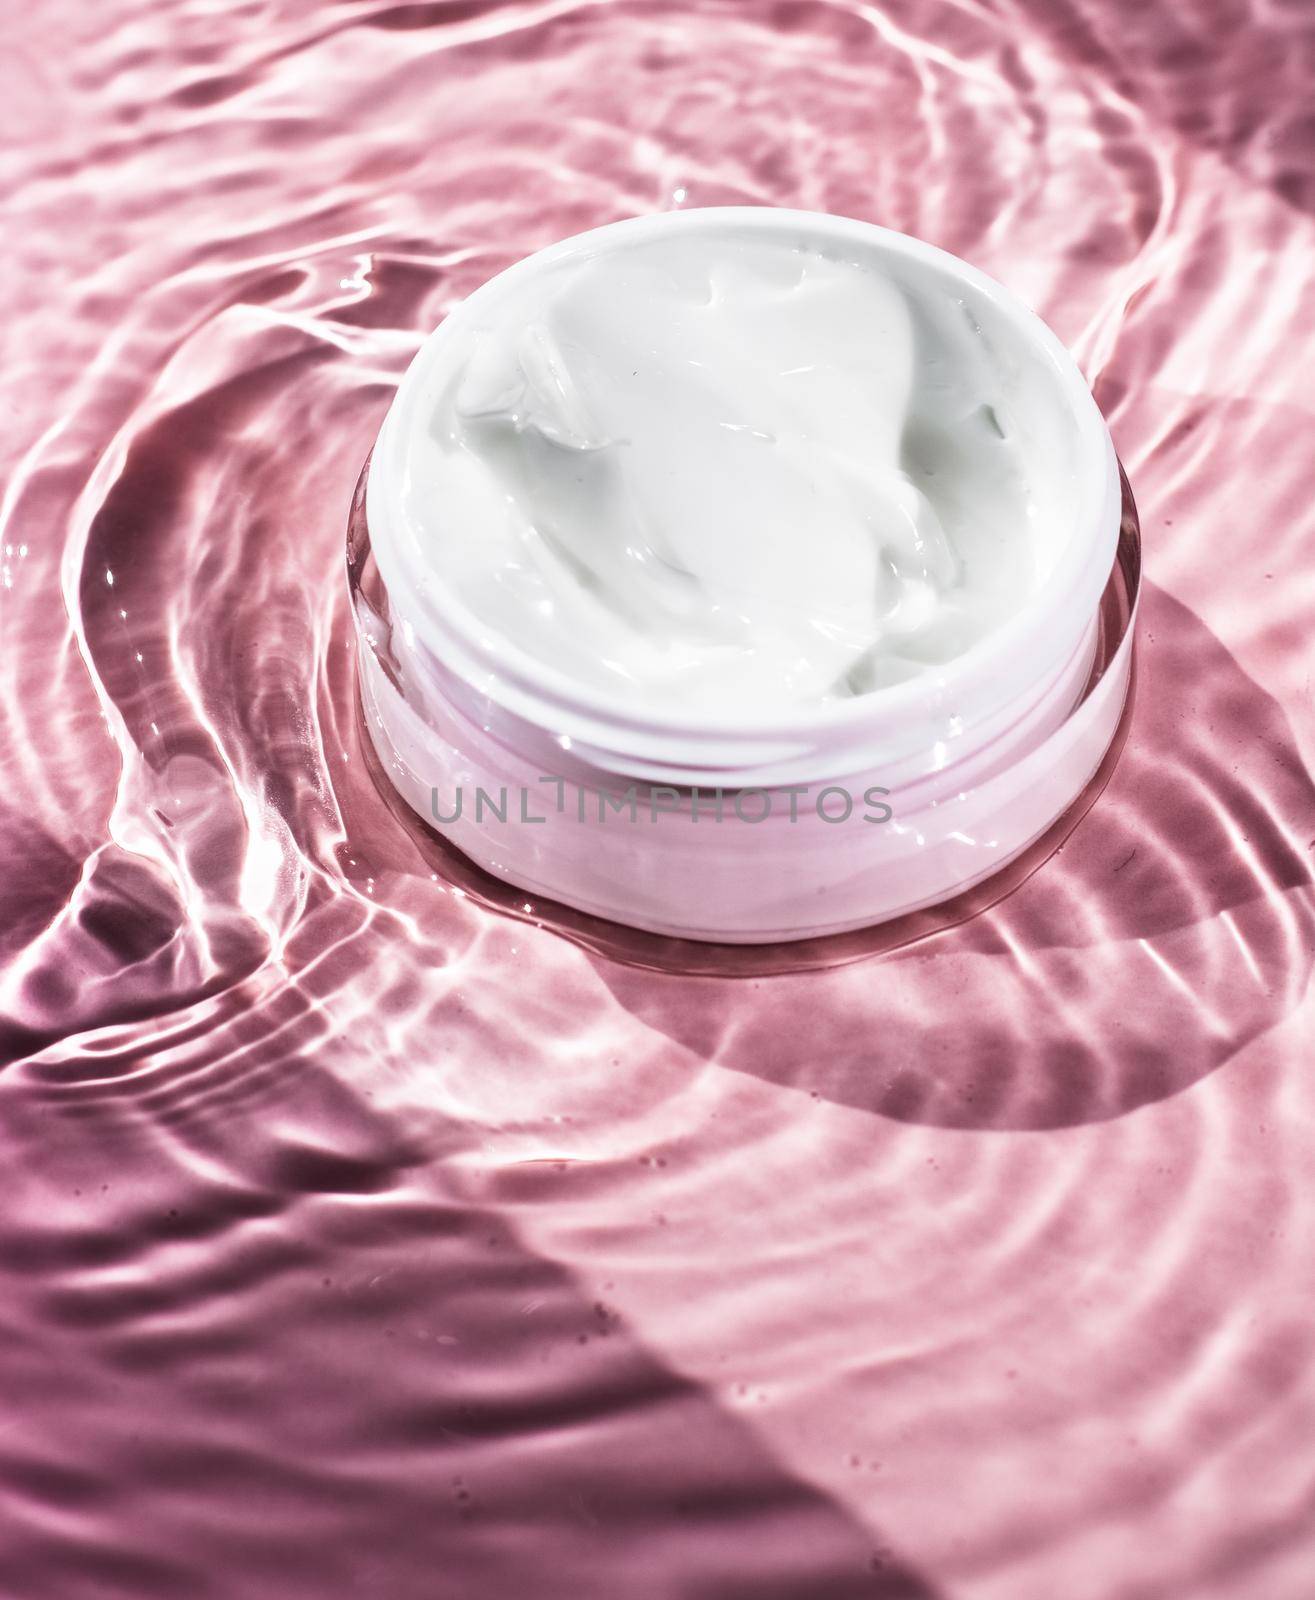 Moisturizing beauty cream, skincare and spa cosmetics by Anneleven